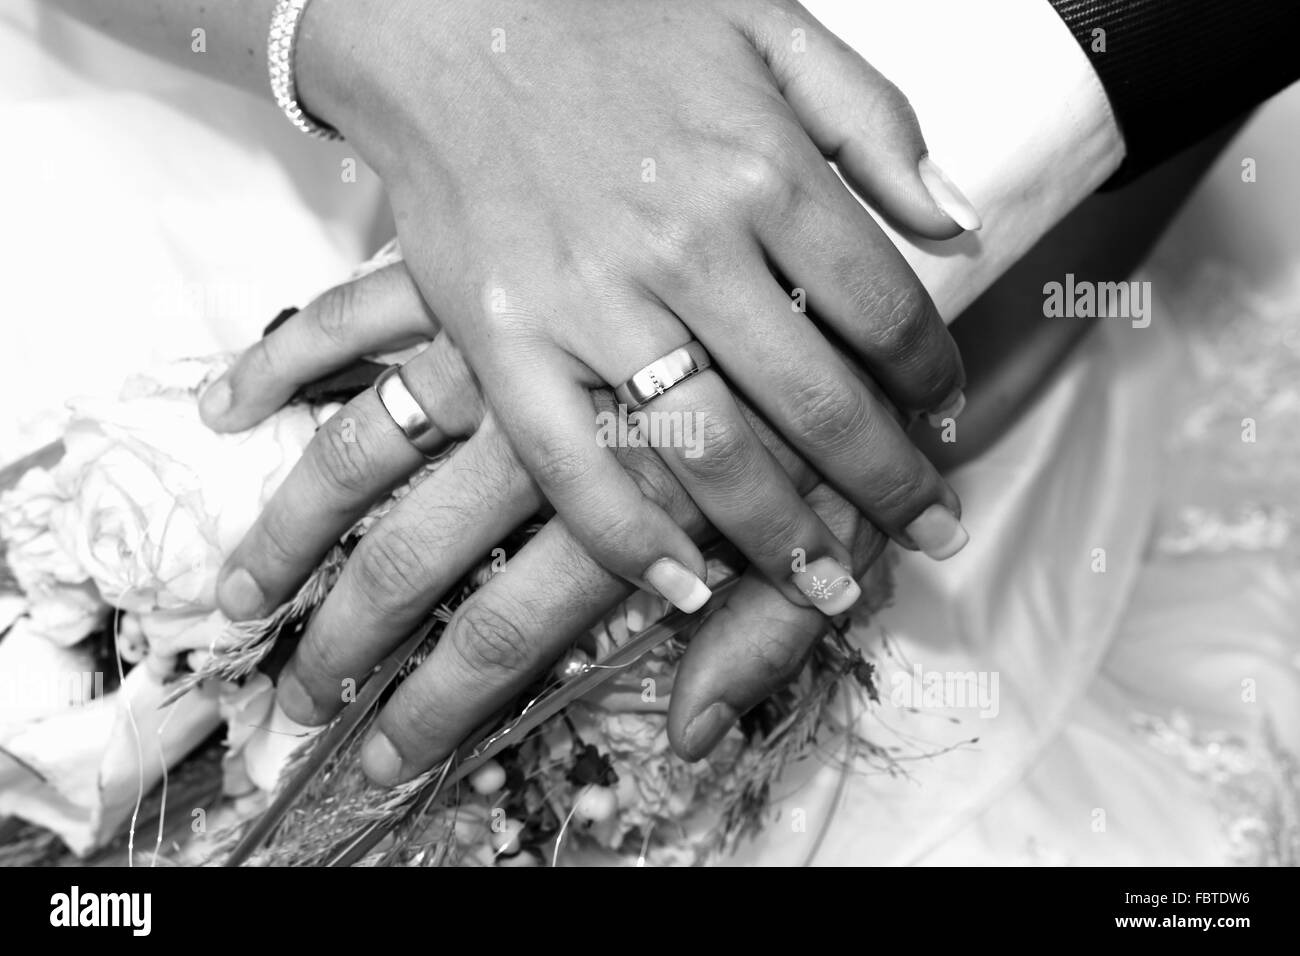 Hands of a bride and groom Stock Photo